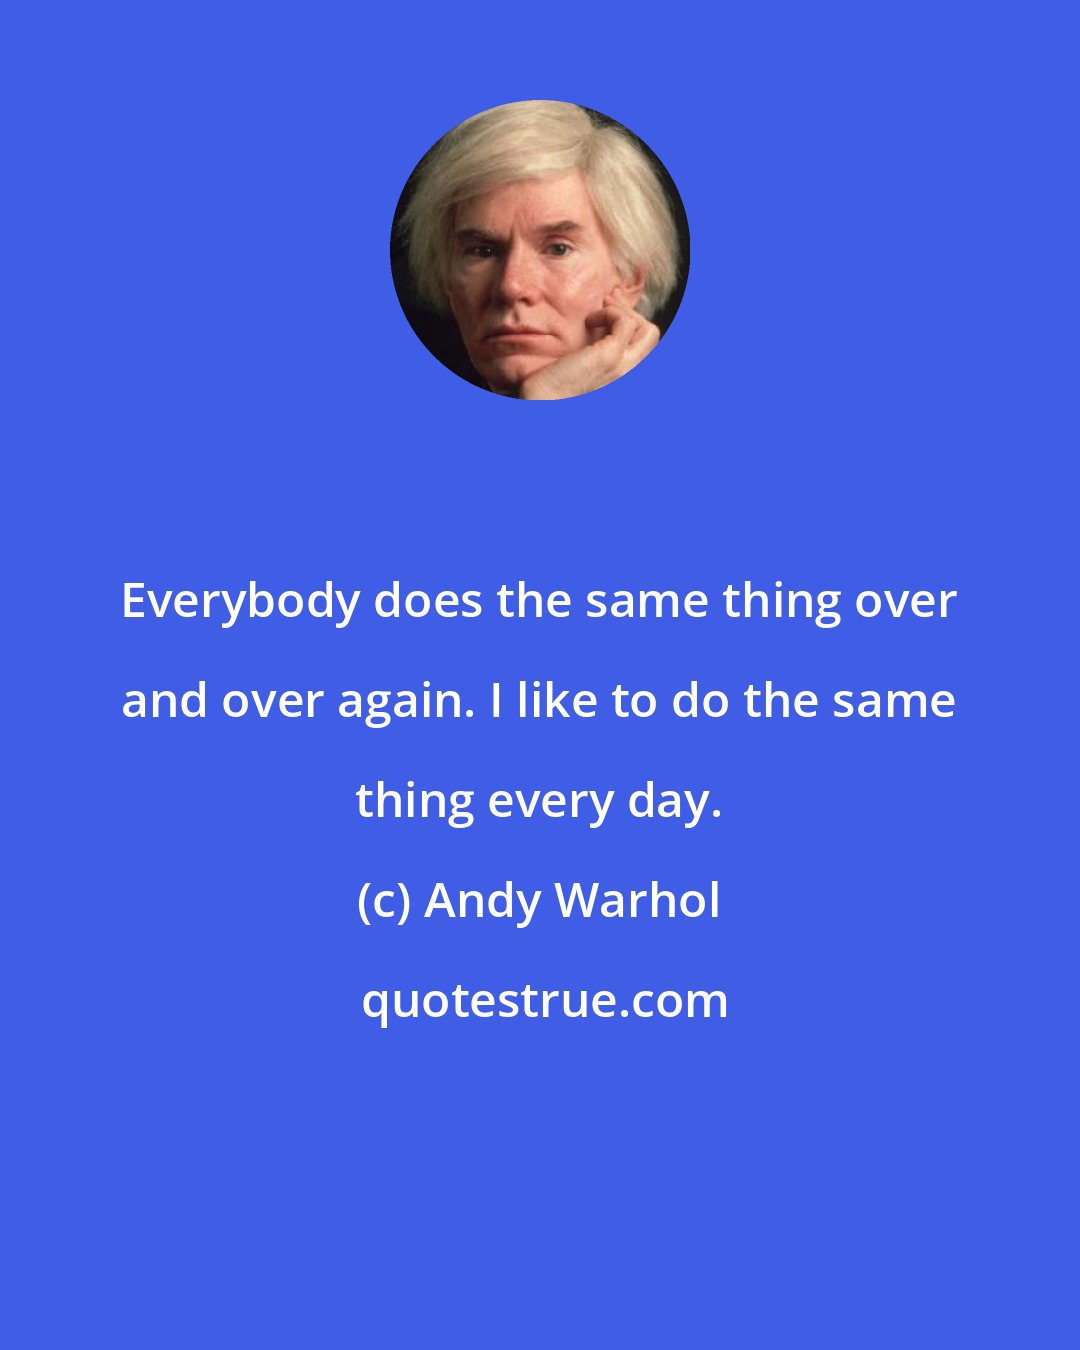 Andy Warhol: Everybody does the same thing over and over again. I like to do the same thing every day.